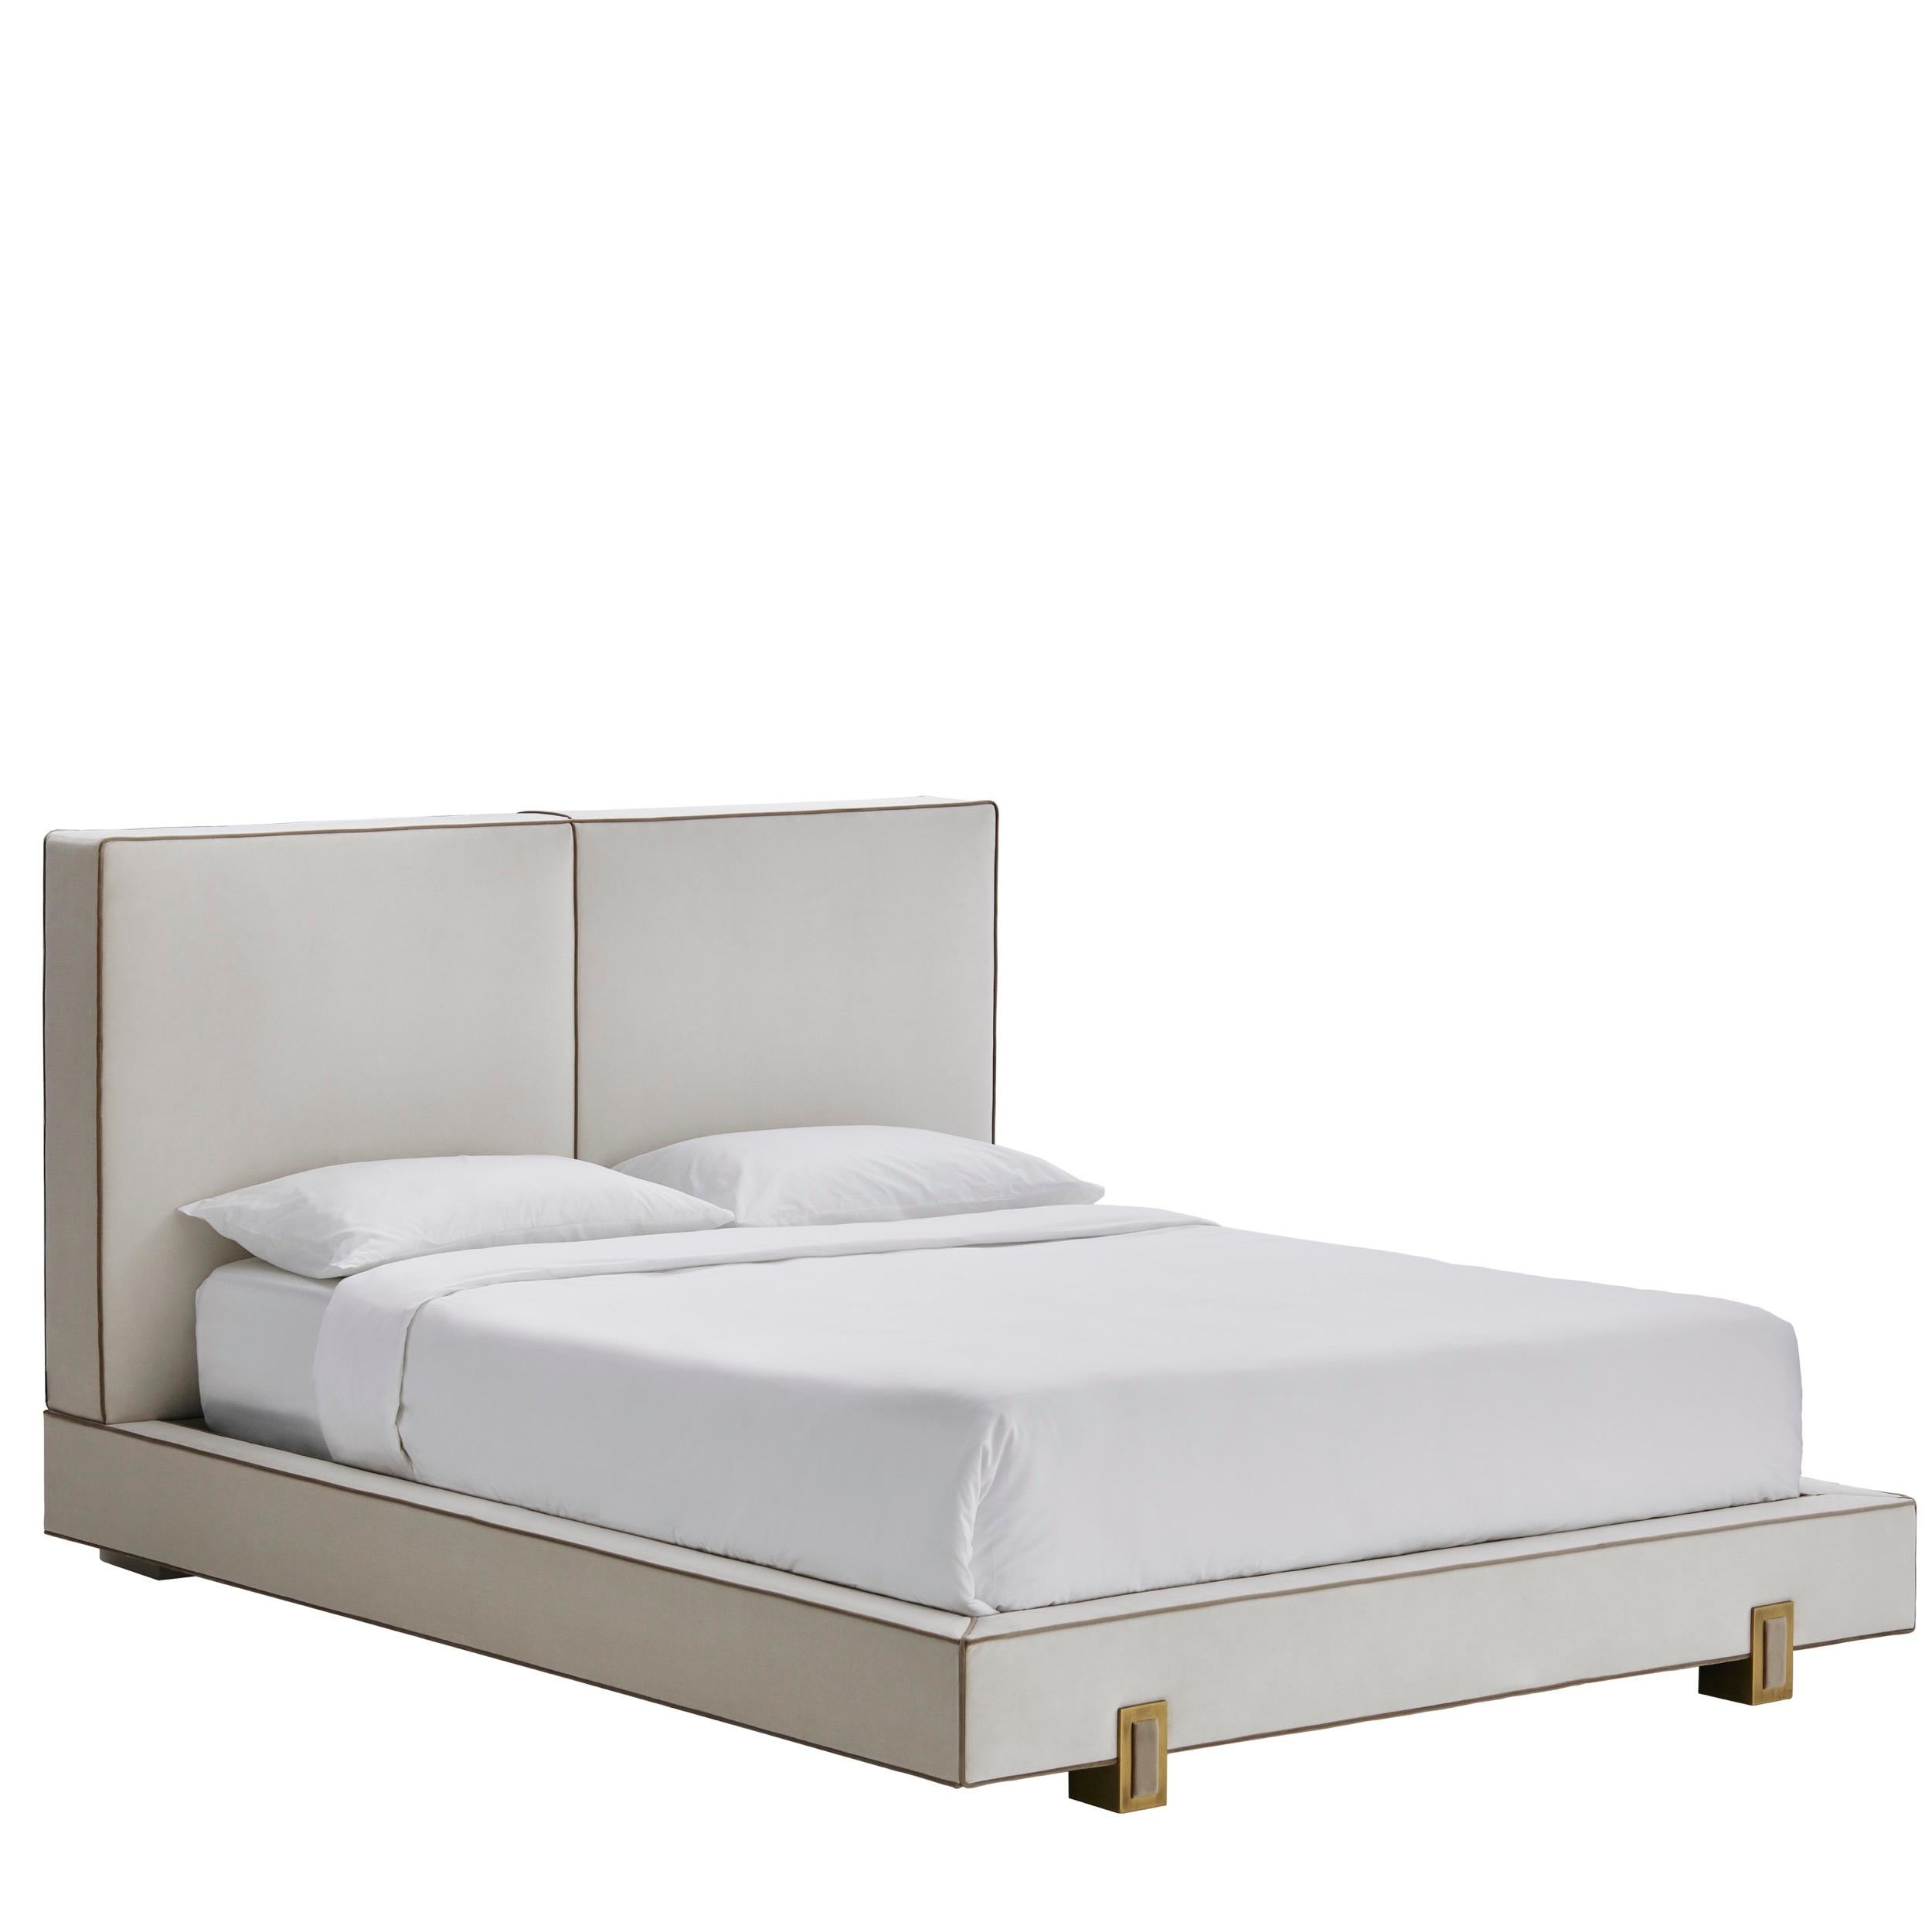 The LUSO bed, upholstered in fabric with a contrasting piping detail, is a very delicate and smooth piece, featuring special details that gives it an extra charming character.‎ Available in three sizes, but on request is customizable.‎

Shown